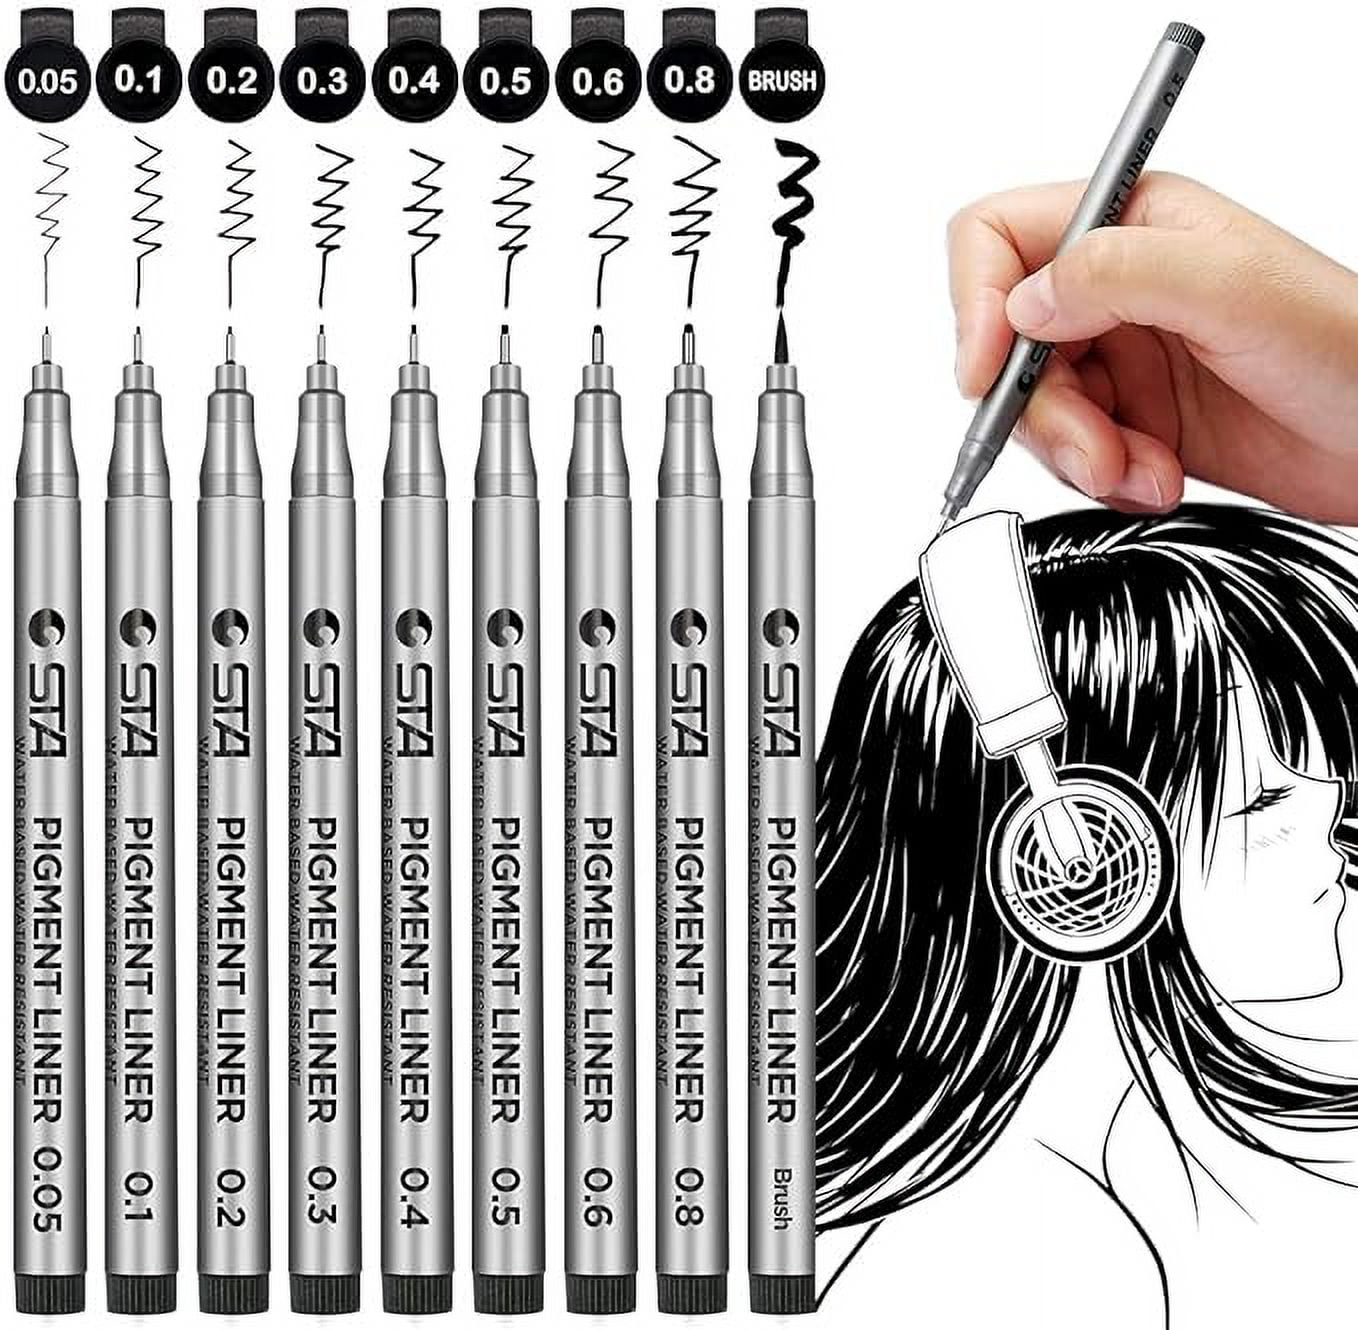  Dyvicl Black Micro-Pen Fineliner Ink Pens - Dual Pigment Liner  Multiliner Pens Micro Fine Point Drawing Pens for Sketching, Anime, Manga,  Artist Illustration, Journaling : Arts, Crafts & Sewing